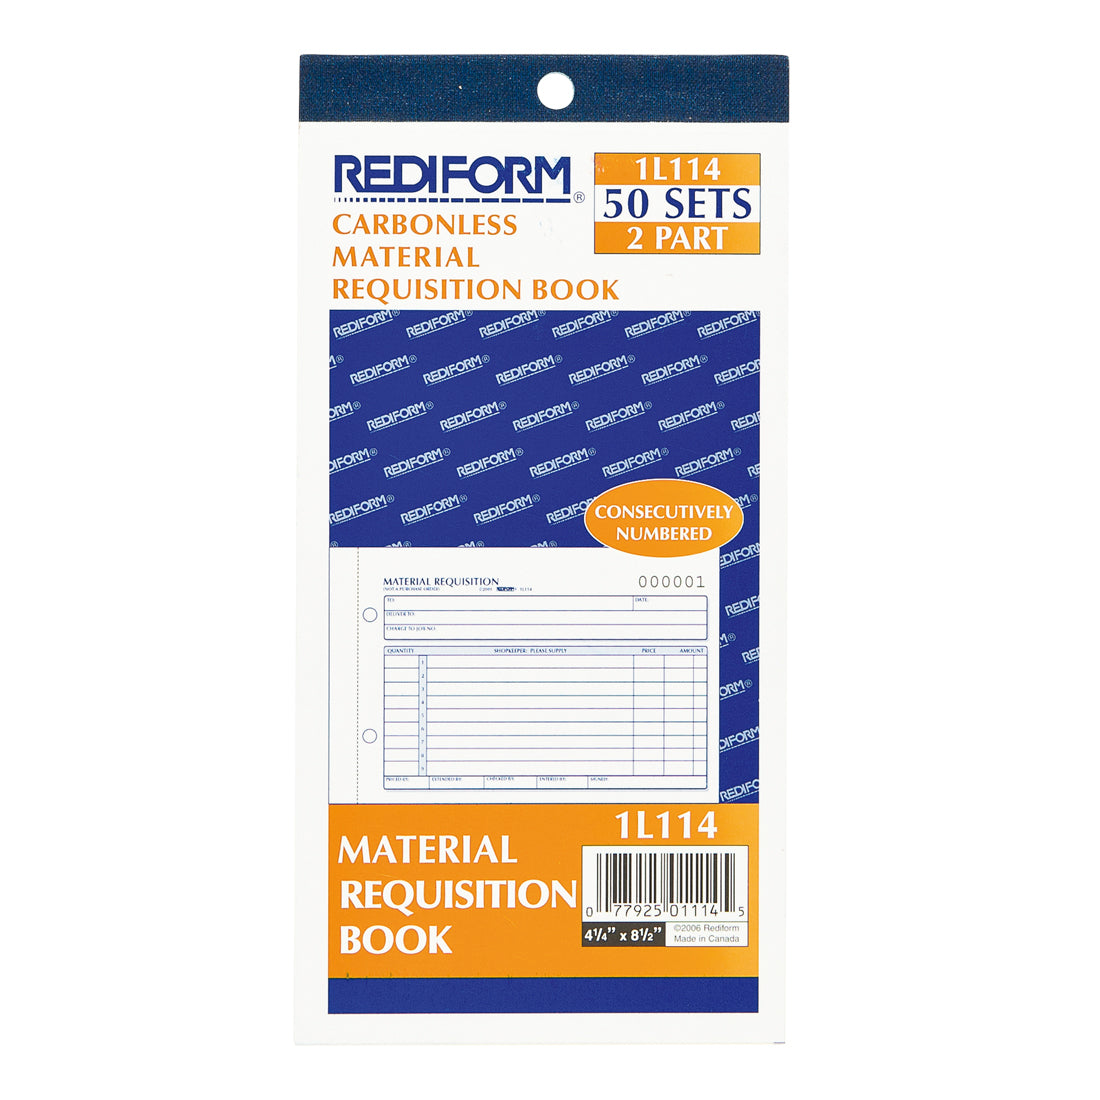 Material Requisition Book 1L114